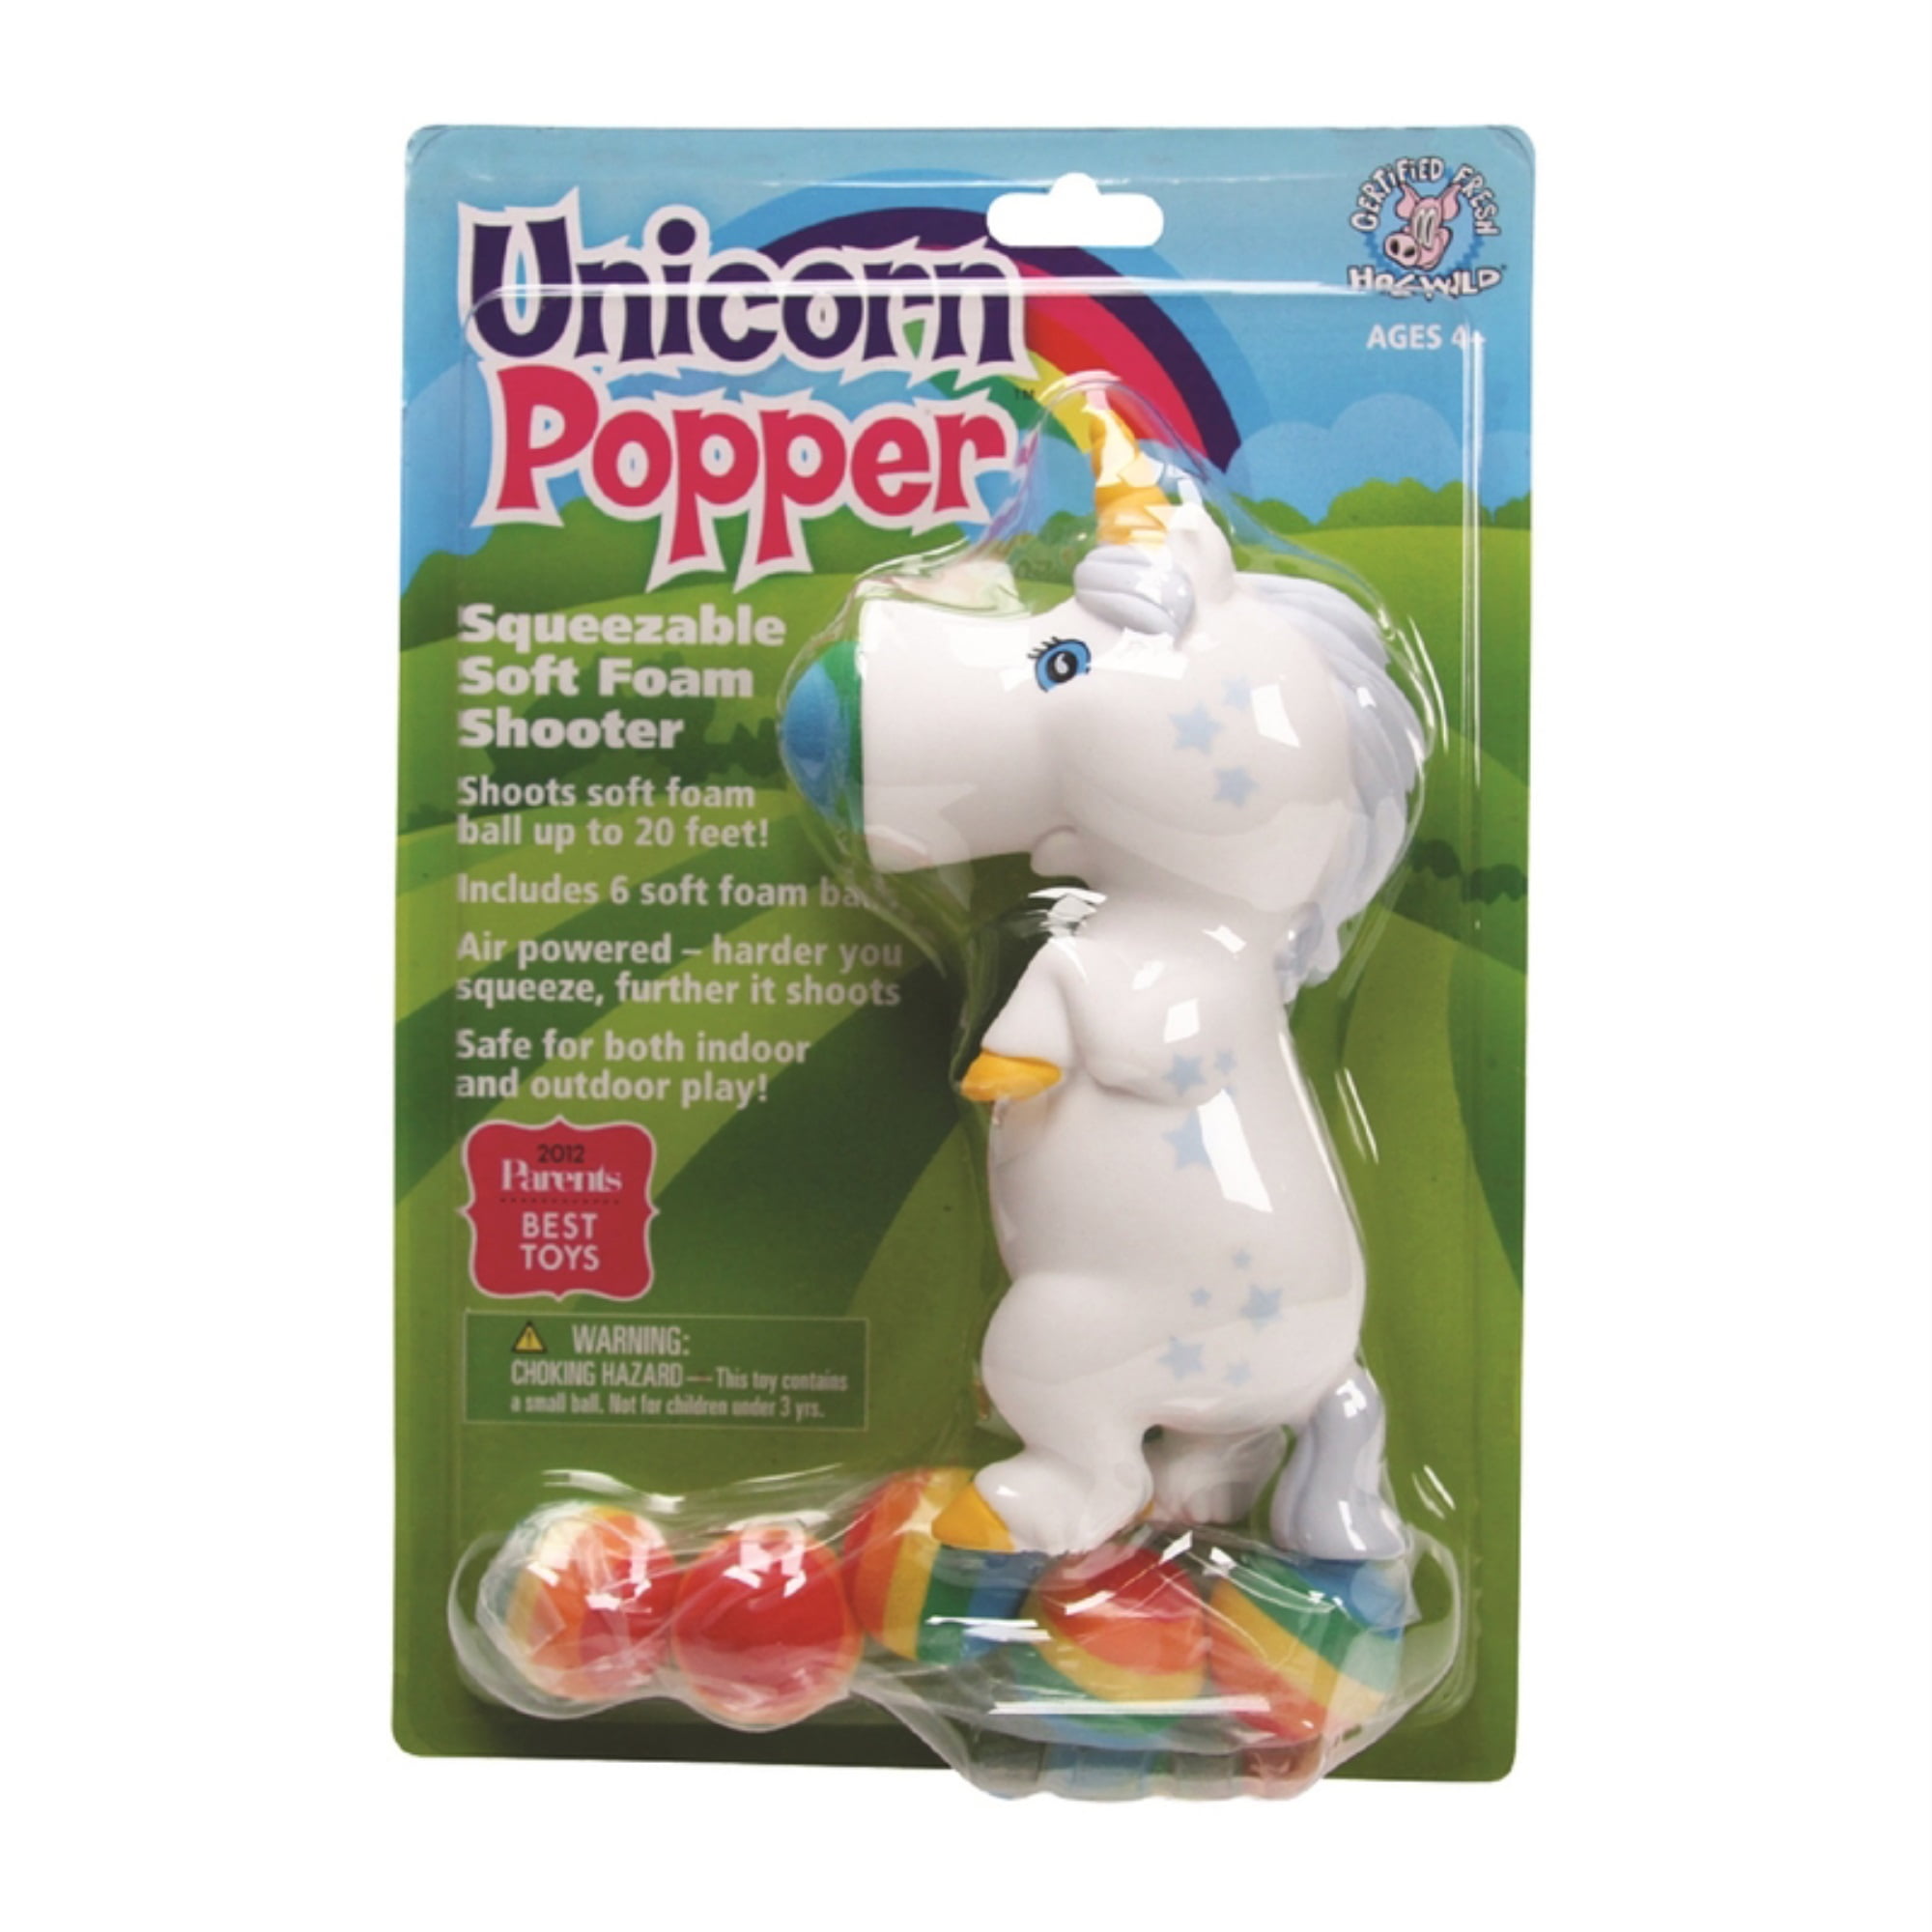 UNICORN POPPER TOY 5 FOAM BALL SHOOTER SQUEEZE ANIMAL GIFT FUN  SHOOTS UP 20FT 